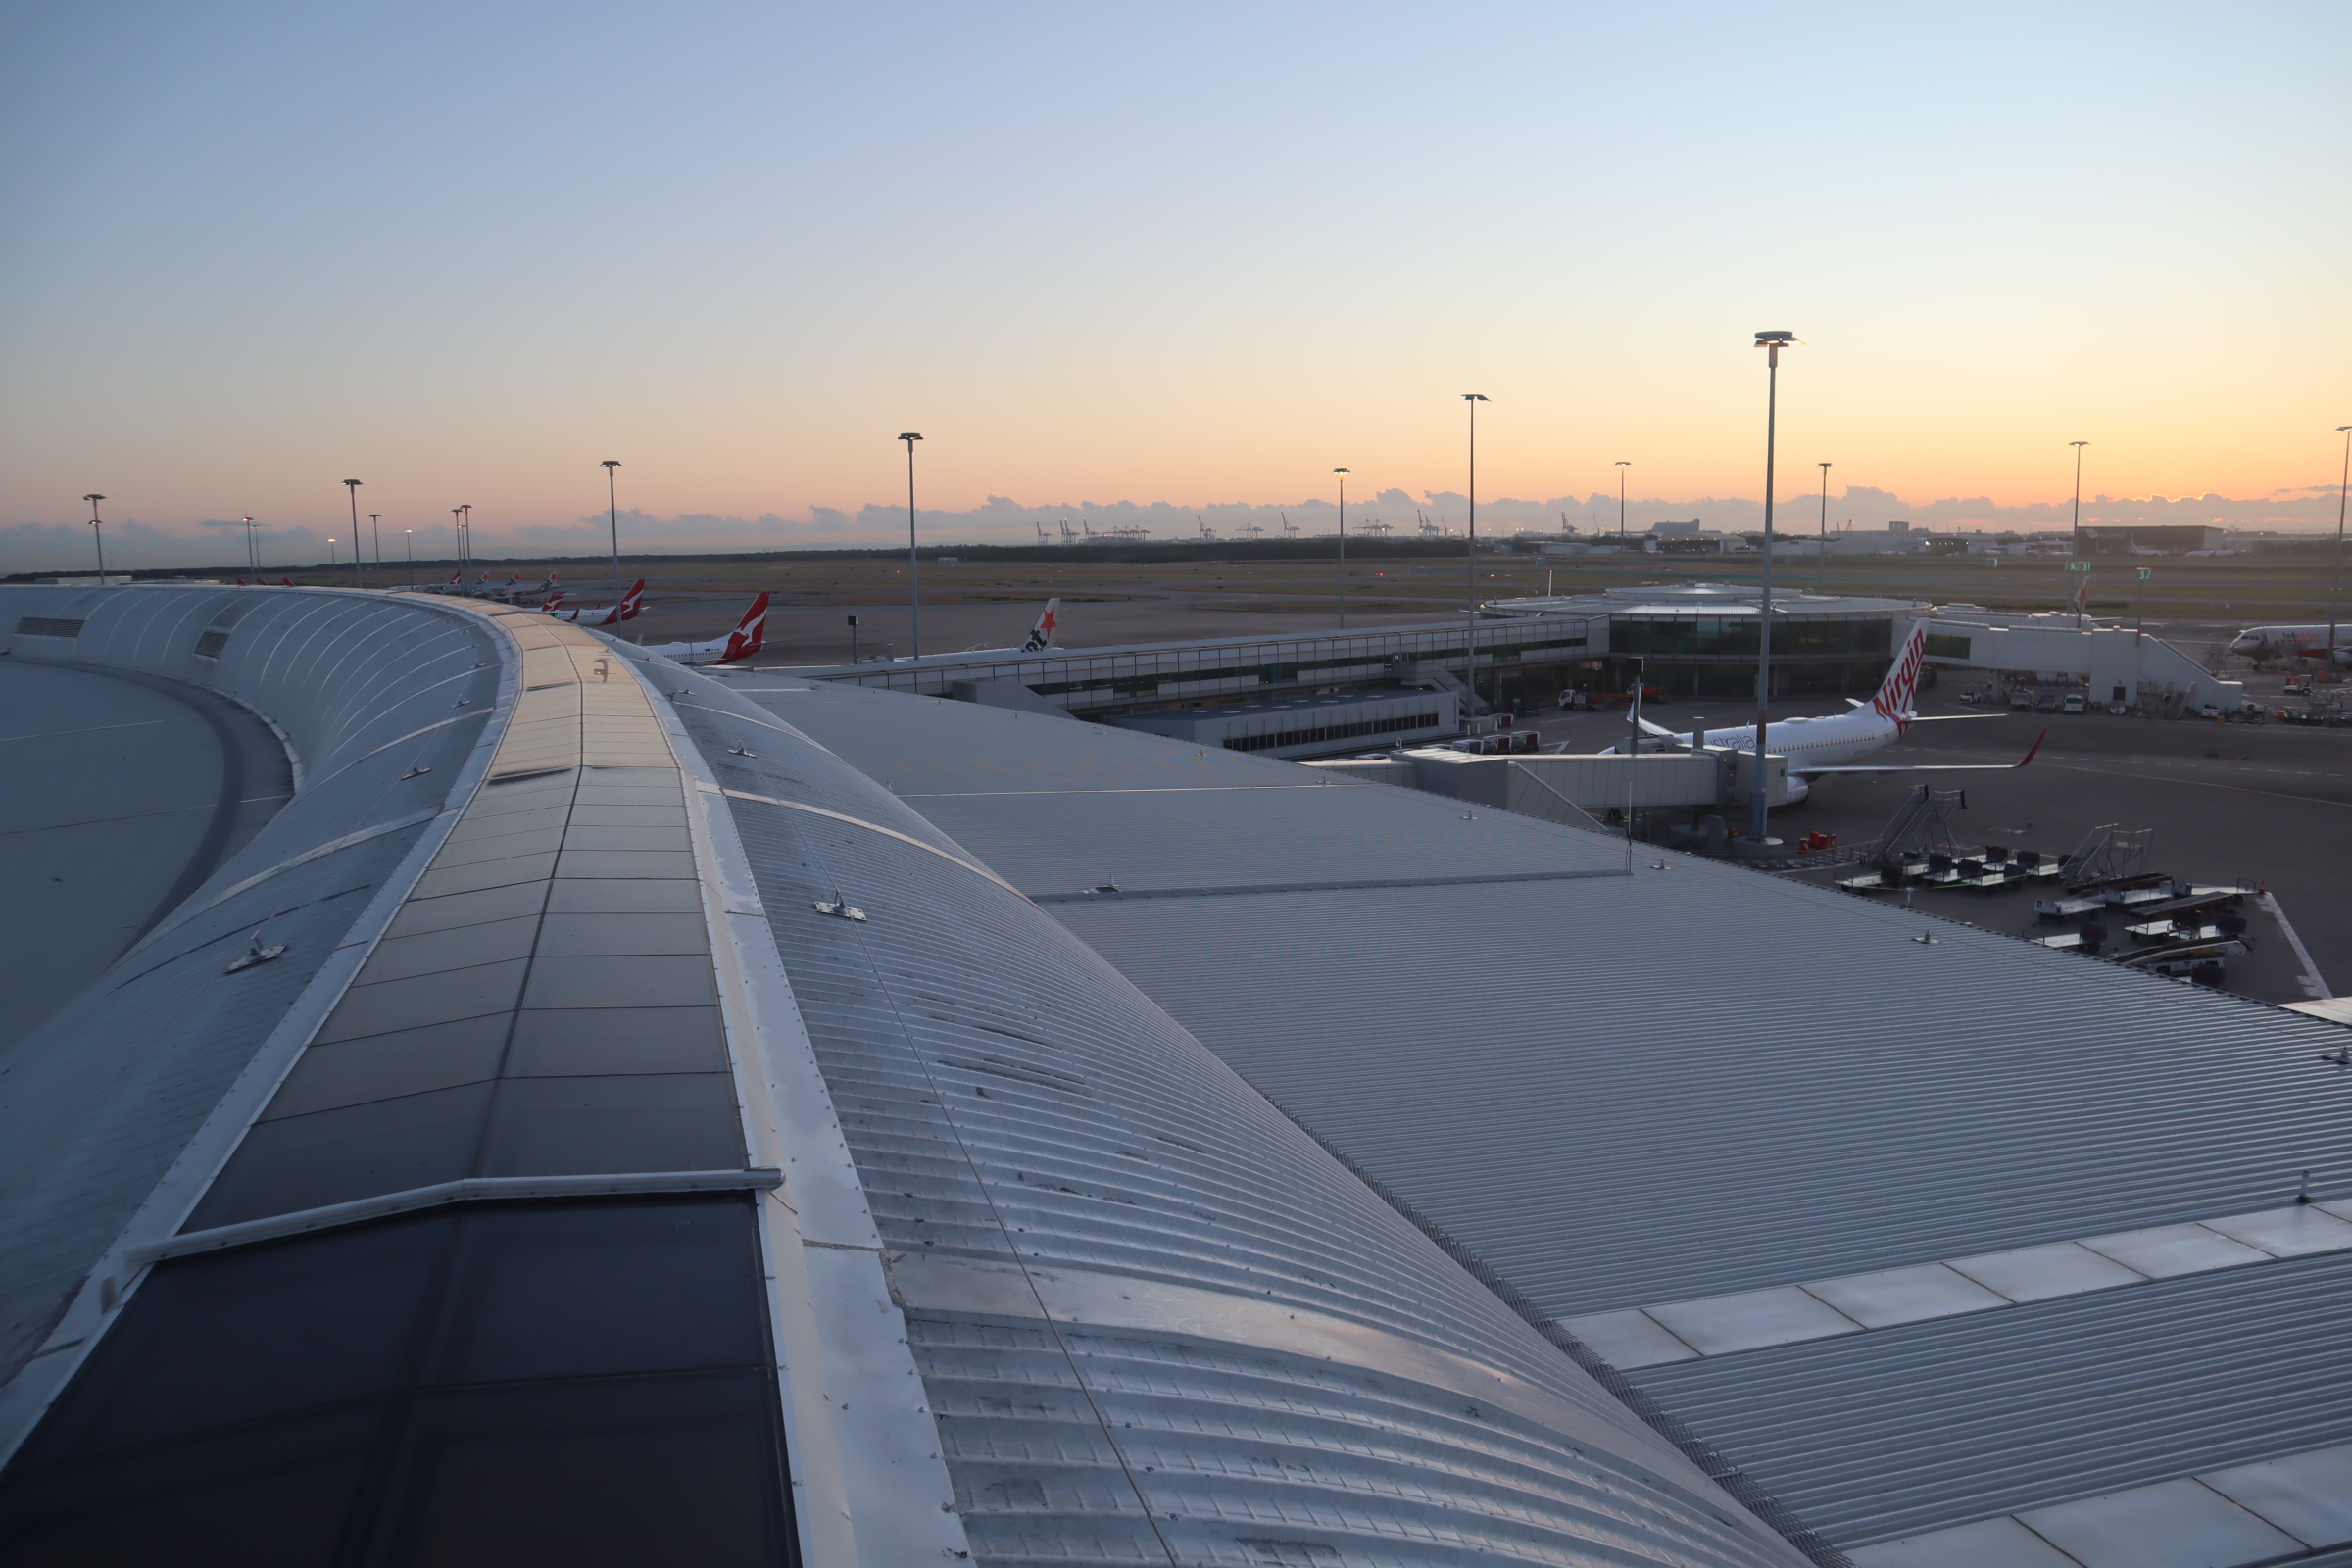 brisbane airport roof at sunset